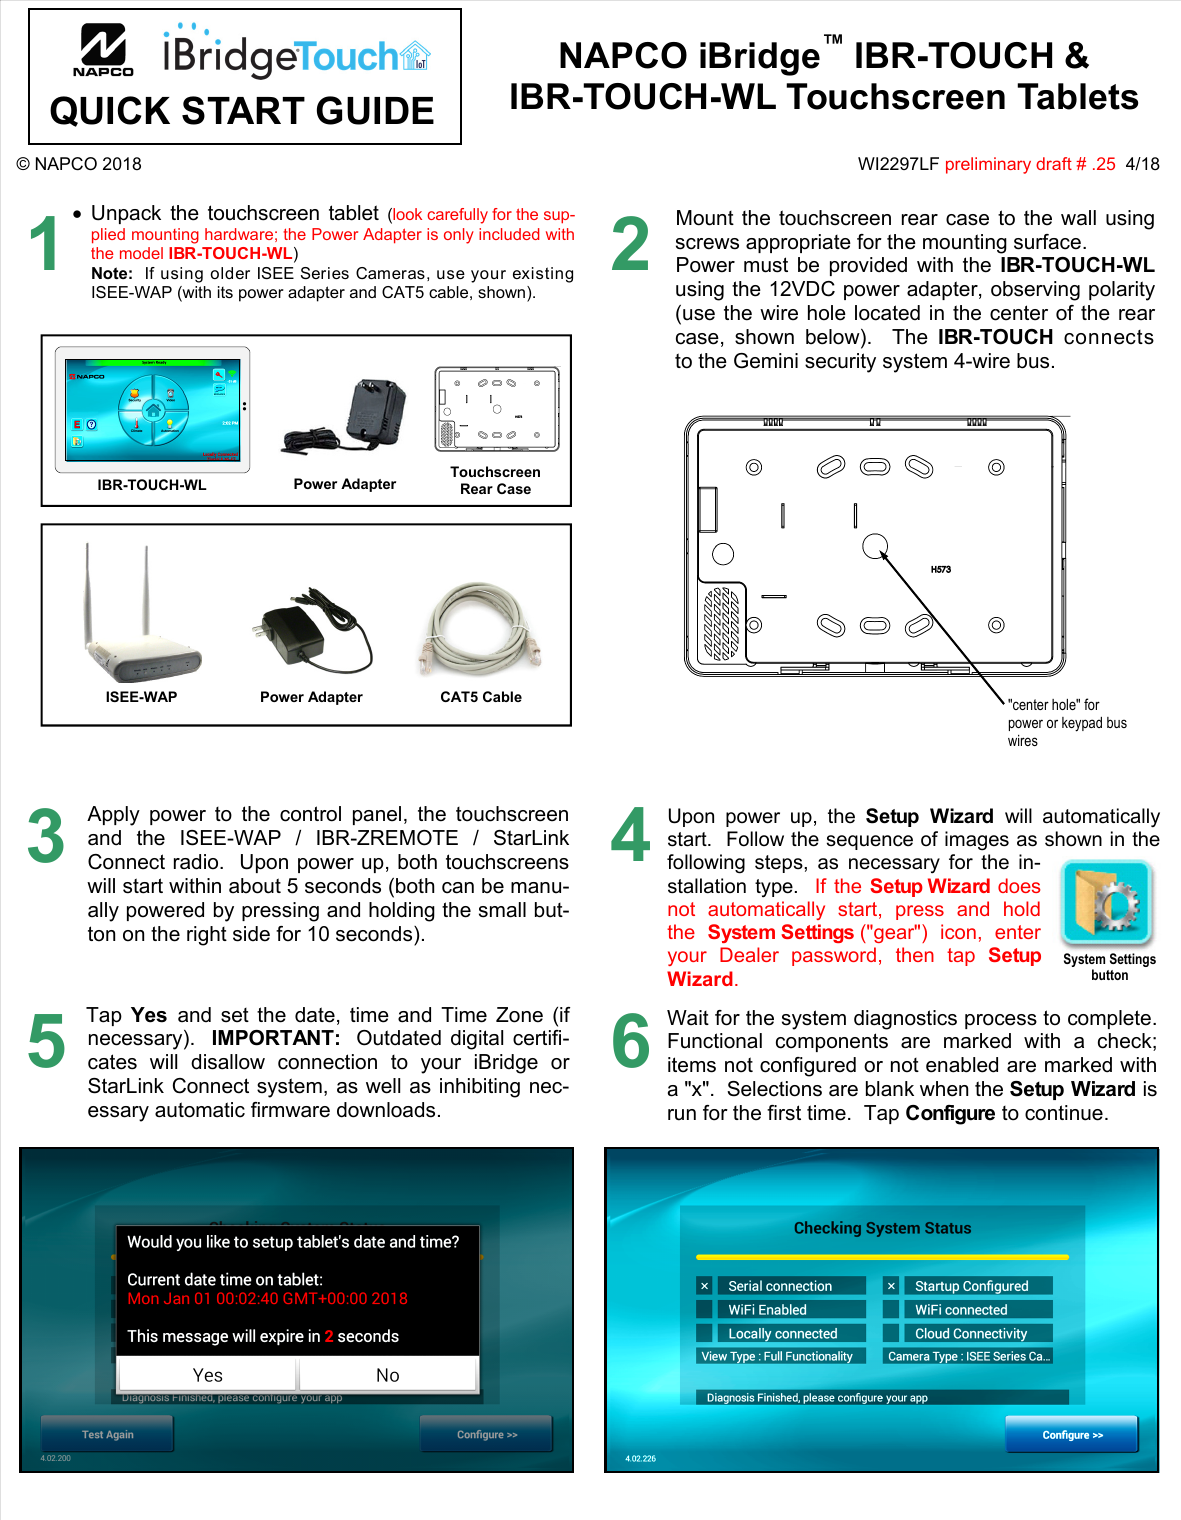 IBR-TOUCH &amp; IBR-TOUCH-WL Quick Start Guide  1 © NAPCO 2018  WI2297LF preliminary draft # .25  4/18 NAPCO iBridge™ IBR-TOUCH &amp;  IBR-TOUCH-WL Touchscreen Tablets 1 Unpack the touchscreen tablet (look carefully for the sup-plied mounting hardware; the Power Adapter is only included withthe model IBR-TOUCH-WL)Note:  If using older ISEE Series Cameras, use your existingISEE-WAP (with its power adapter and CAT5 cable, shown).IBR-TOUCH-WL  Touchscreen Rear Case 2Mount the touchscreen rear case to the wall using screws appropriate for the mounting surface.   Power must be provided with the IBR-TOUCH-WL using the 12VDC power adapter, observing polarity (use the wire hole located in the center of the rear case, shown below).  The IBR-TOUCH connects to the Gemini security system 4-wire bus. 3Apply power to the control panel, the touchscreen and the ISEE-WAP / IBR-ZREMOTE / StarLink Connect radio.  Upon power up, both touchscreens will start within about 5 seconds (both can be manu-ally powered by pressing and holding the small but-ton on the right side for 10 seconds).  4Upon power up, the Setup Wizard will automatically start.  Follow the sequence of images as shown in the following steps, as necessary for the in-stallation type.  If the Setup Wizard does not automatically start, press and hold the  System Settings (&quot;gear&quot;) icon, enter your Dealer password, then tap Setup Wizard.  &quot;center hole&quot; for power or keypad bus wires CAT5 Cable ISEE-WAP  Power Adapter Power Adapter Tap  Yes  and set the date, time and Time Zone (if necessary).  IMPORTANT:  Outdated digital certifi-cates will disallow connection to your iBridge or StarLink Connect system, as well as inhibiting nec-essary automatic firmware downloads.   5Wait for the system diagnostics process to complete. Functional components are marked with a check; items not configured or not enabled are marked with a &quot;x&quot;.  Selections are blank when the Setup Wizard is run for the first time.  Tap Configure to continue.  6 . . System Settings button QUICK START GUIDE 